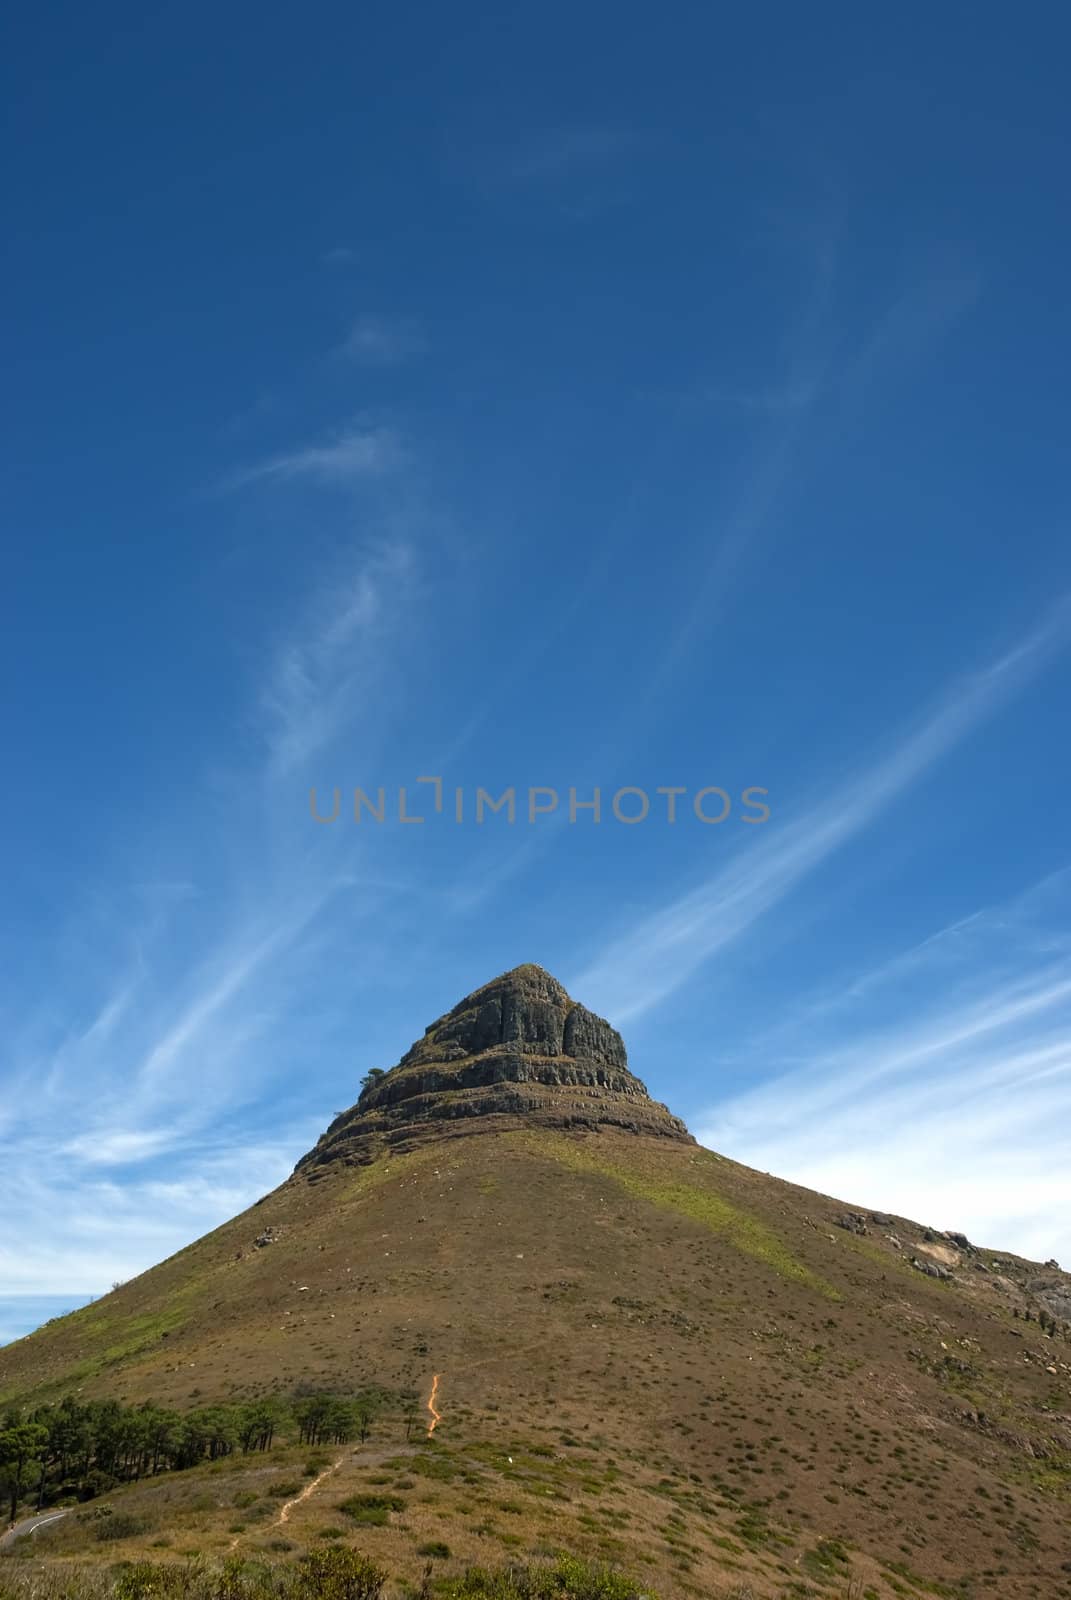 Lion's head, which is part of Table mountain with blue sky and clouds overhead